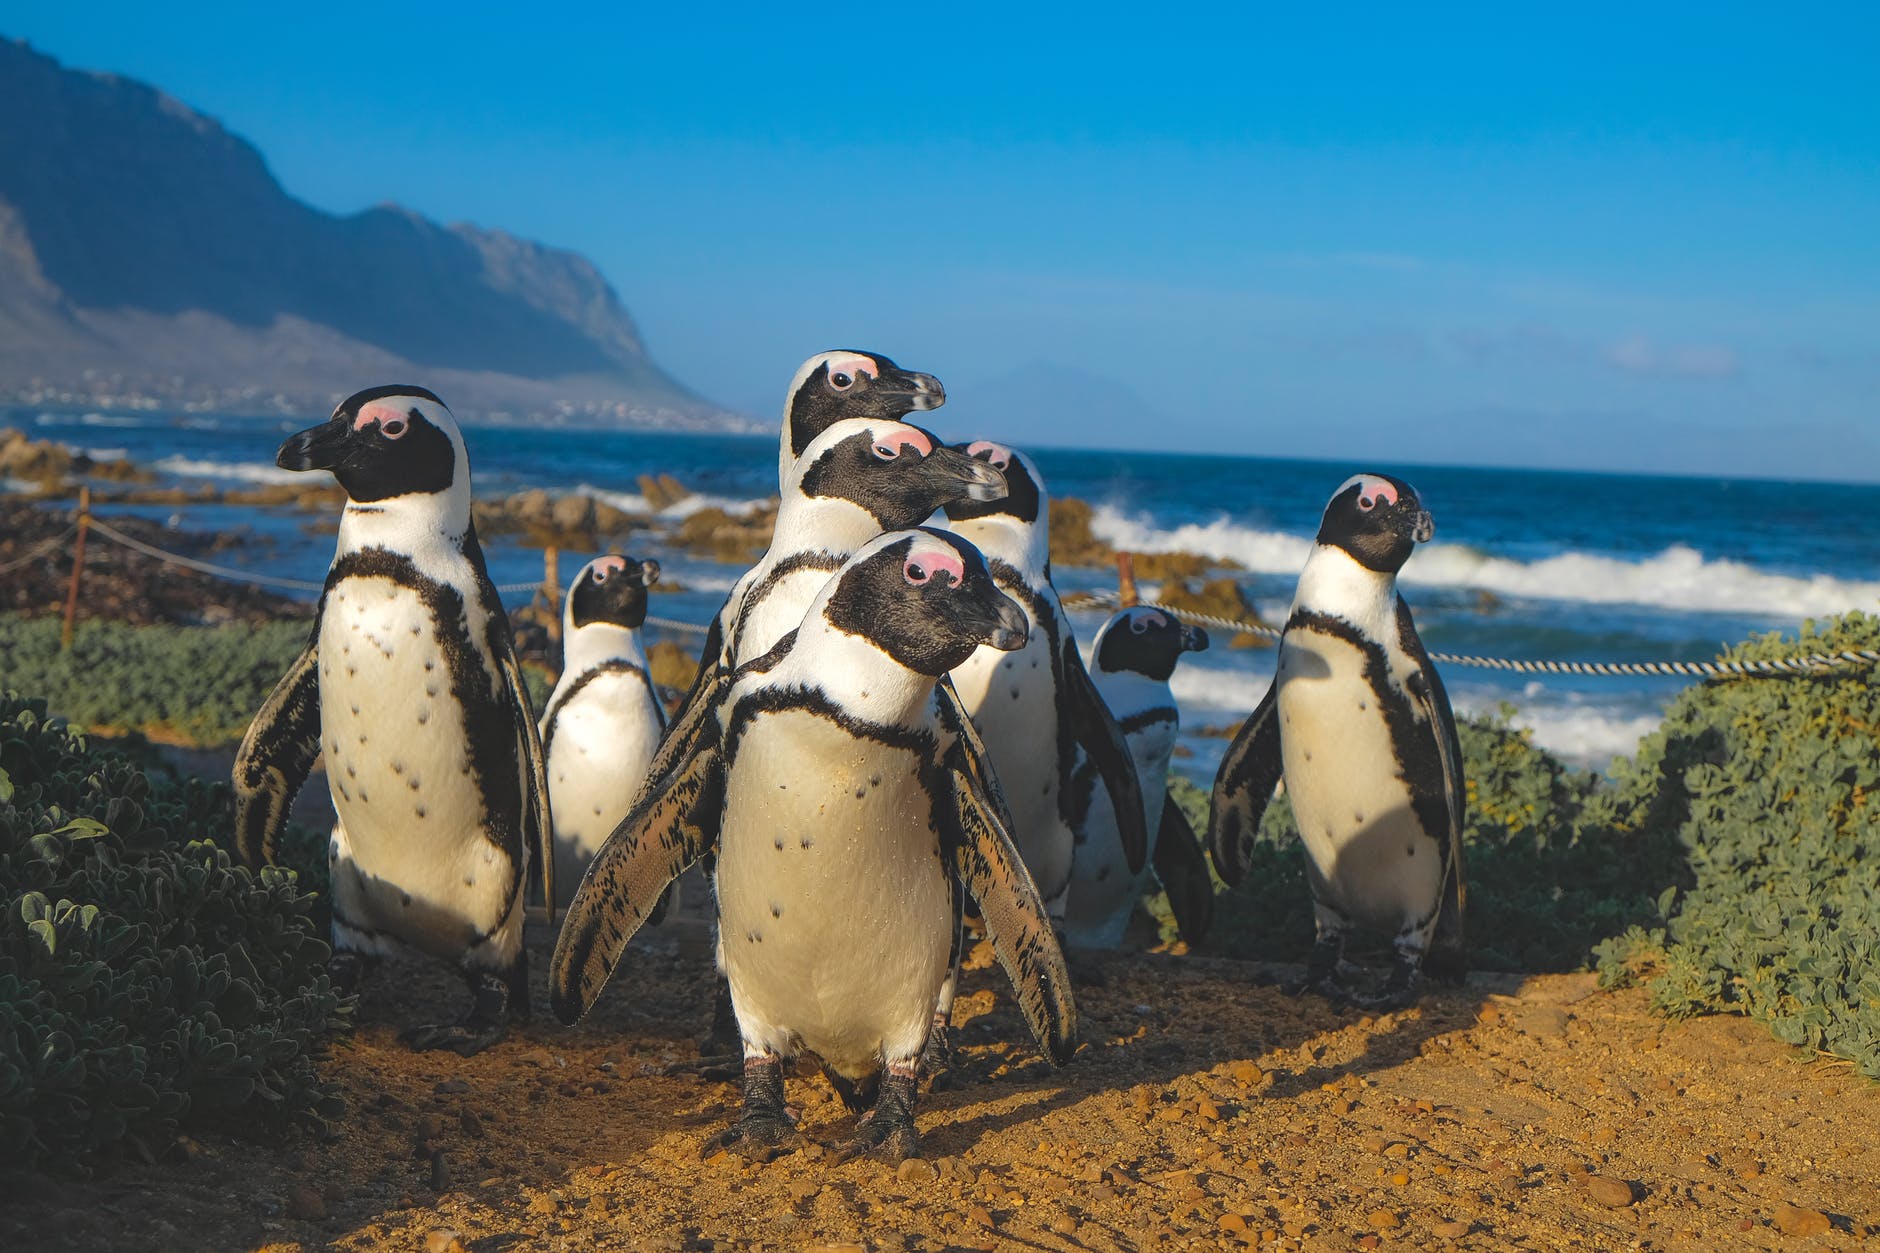 The beautiful Boulders Beach is one of Cape Town’s most visited beaches and the only place in the world where you get close to African Penguins.